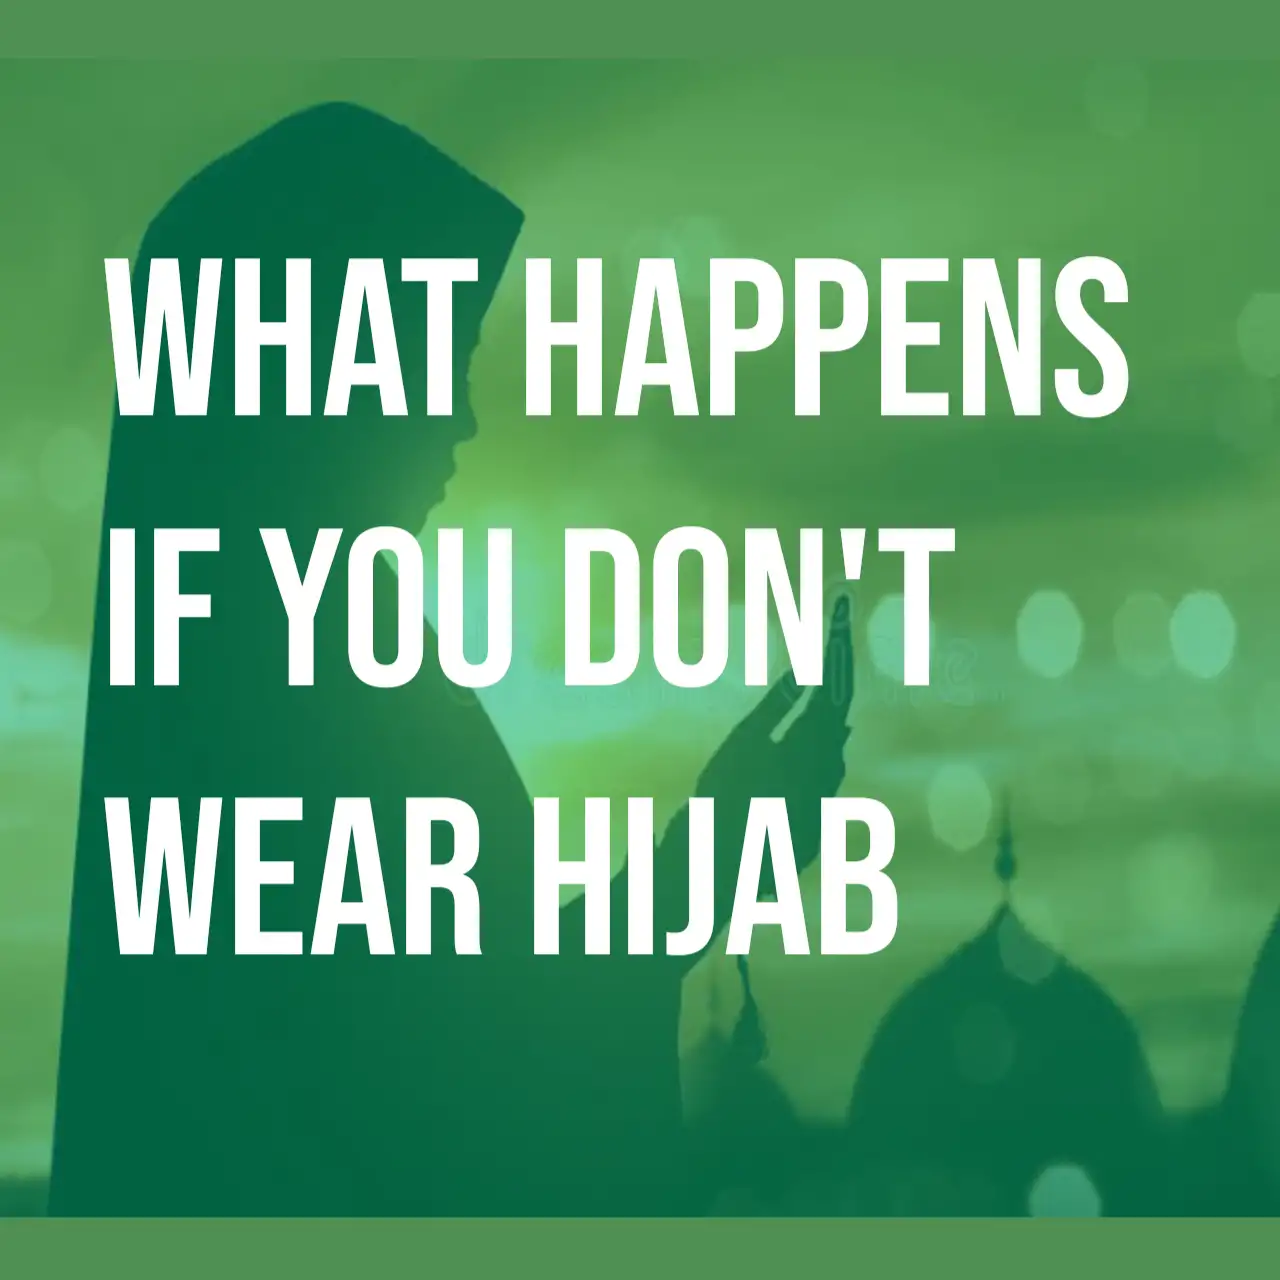 What happens if you don't wear hijab